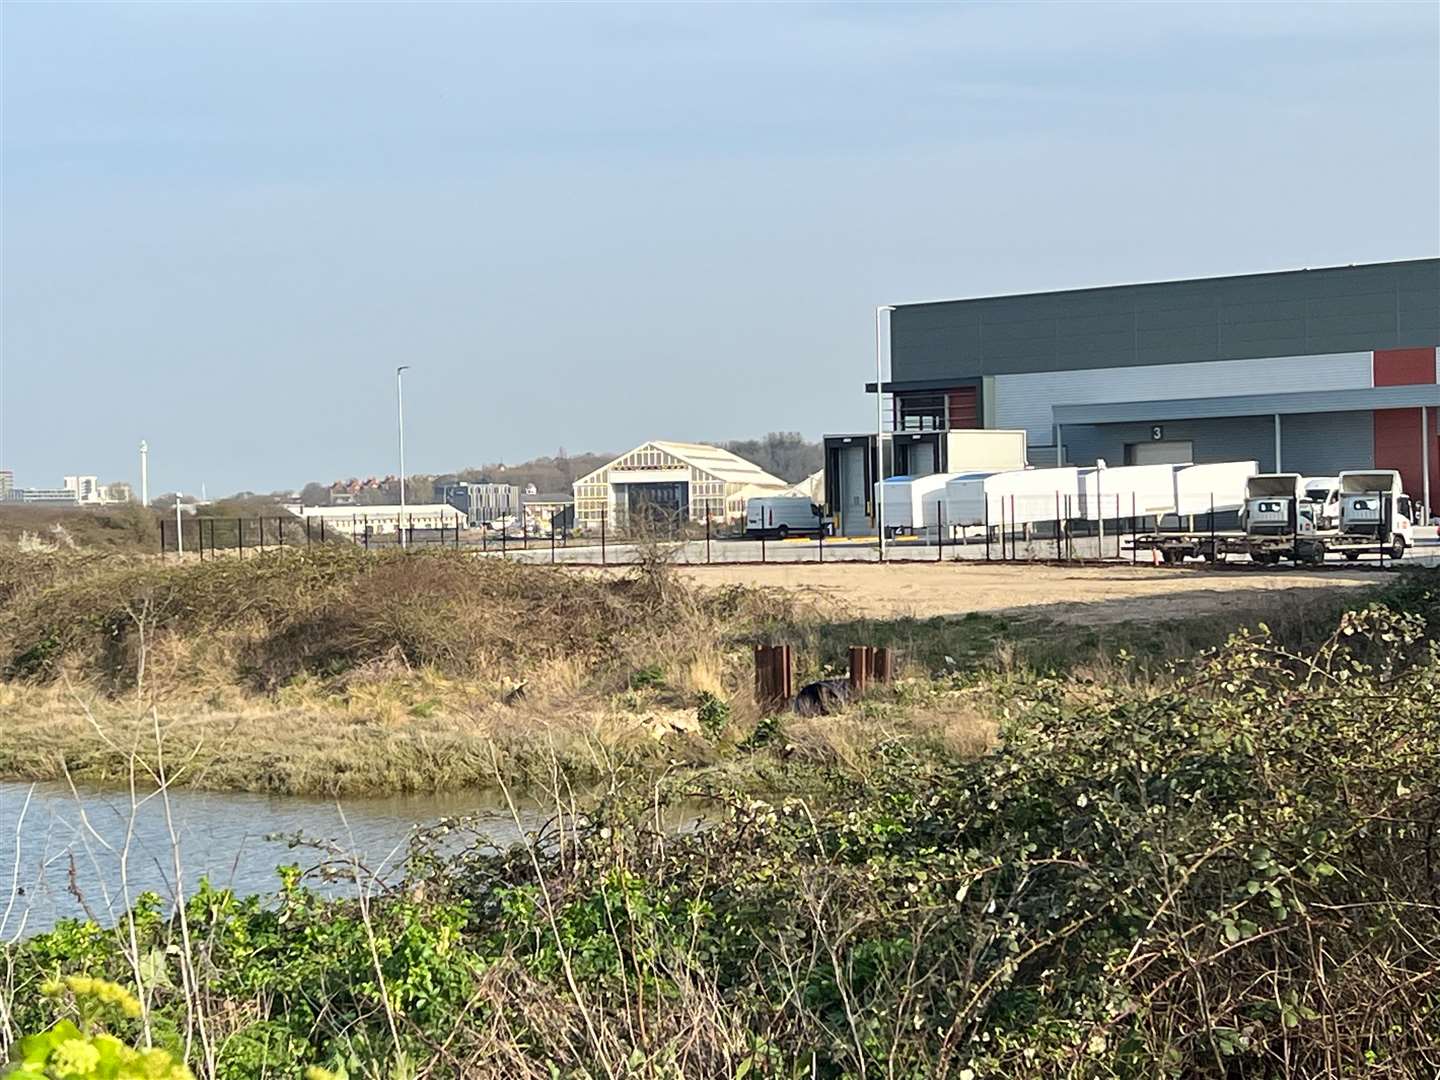 Costa Coffee wanted to build a drive-thru on the land at the start of Medway City Estate